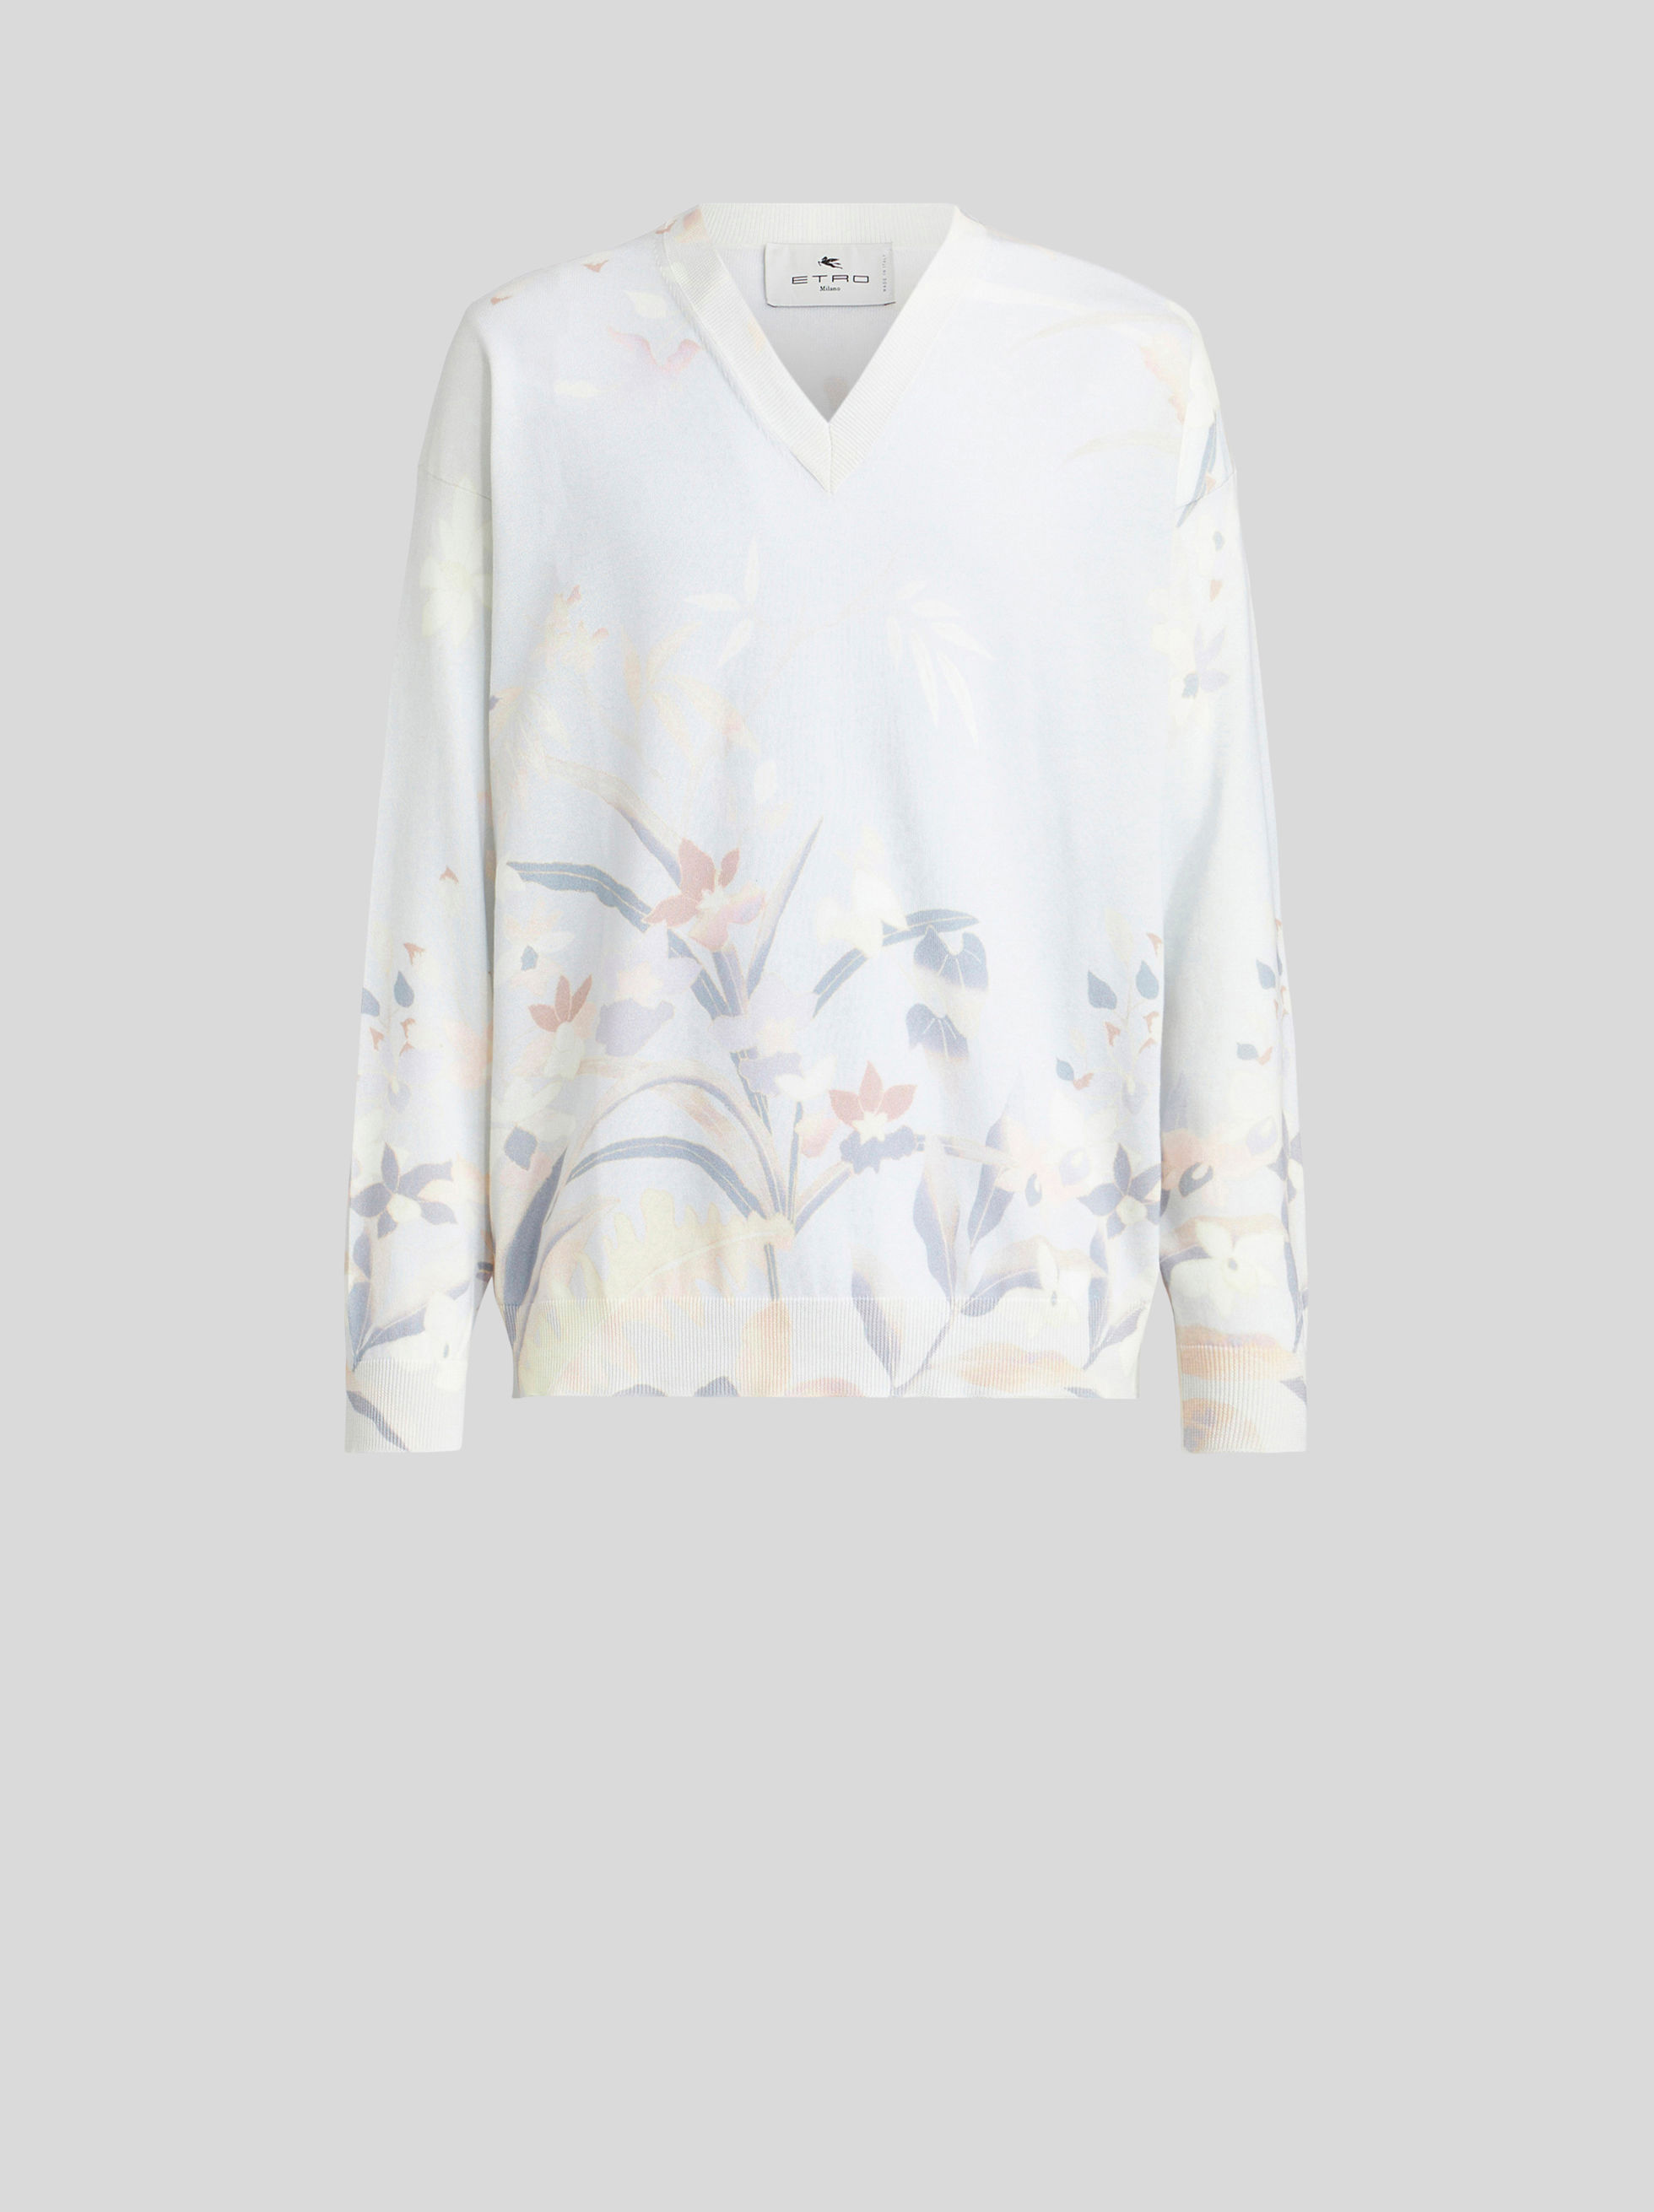 JUMPER WITH LEAFY FLORAL PRINT